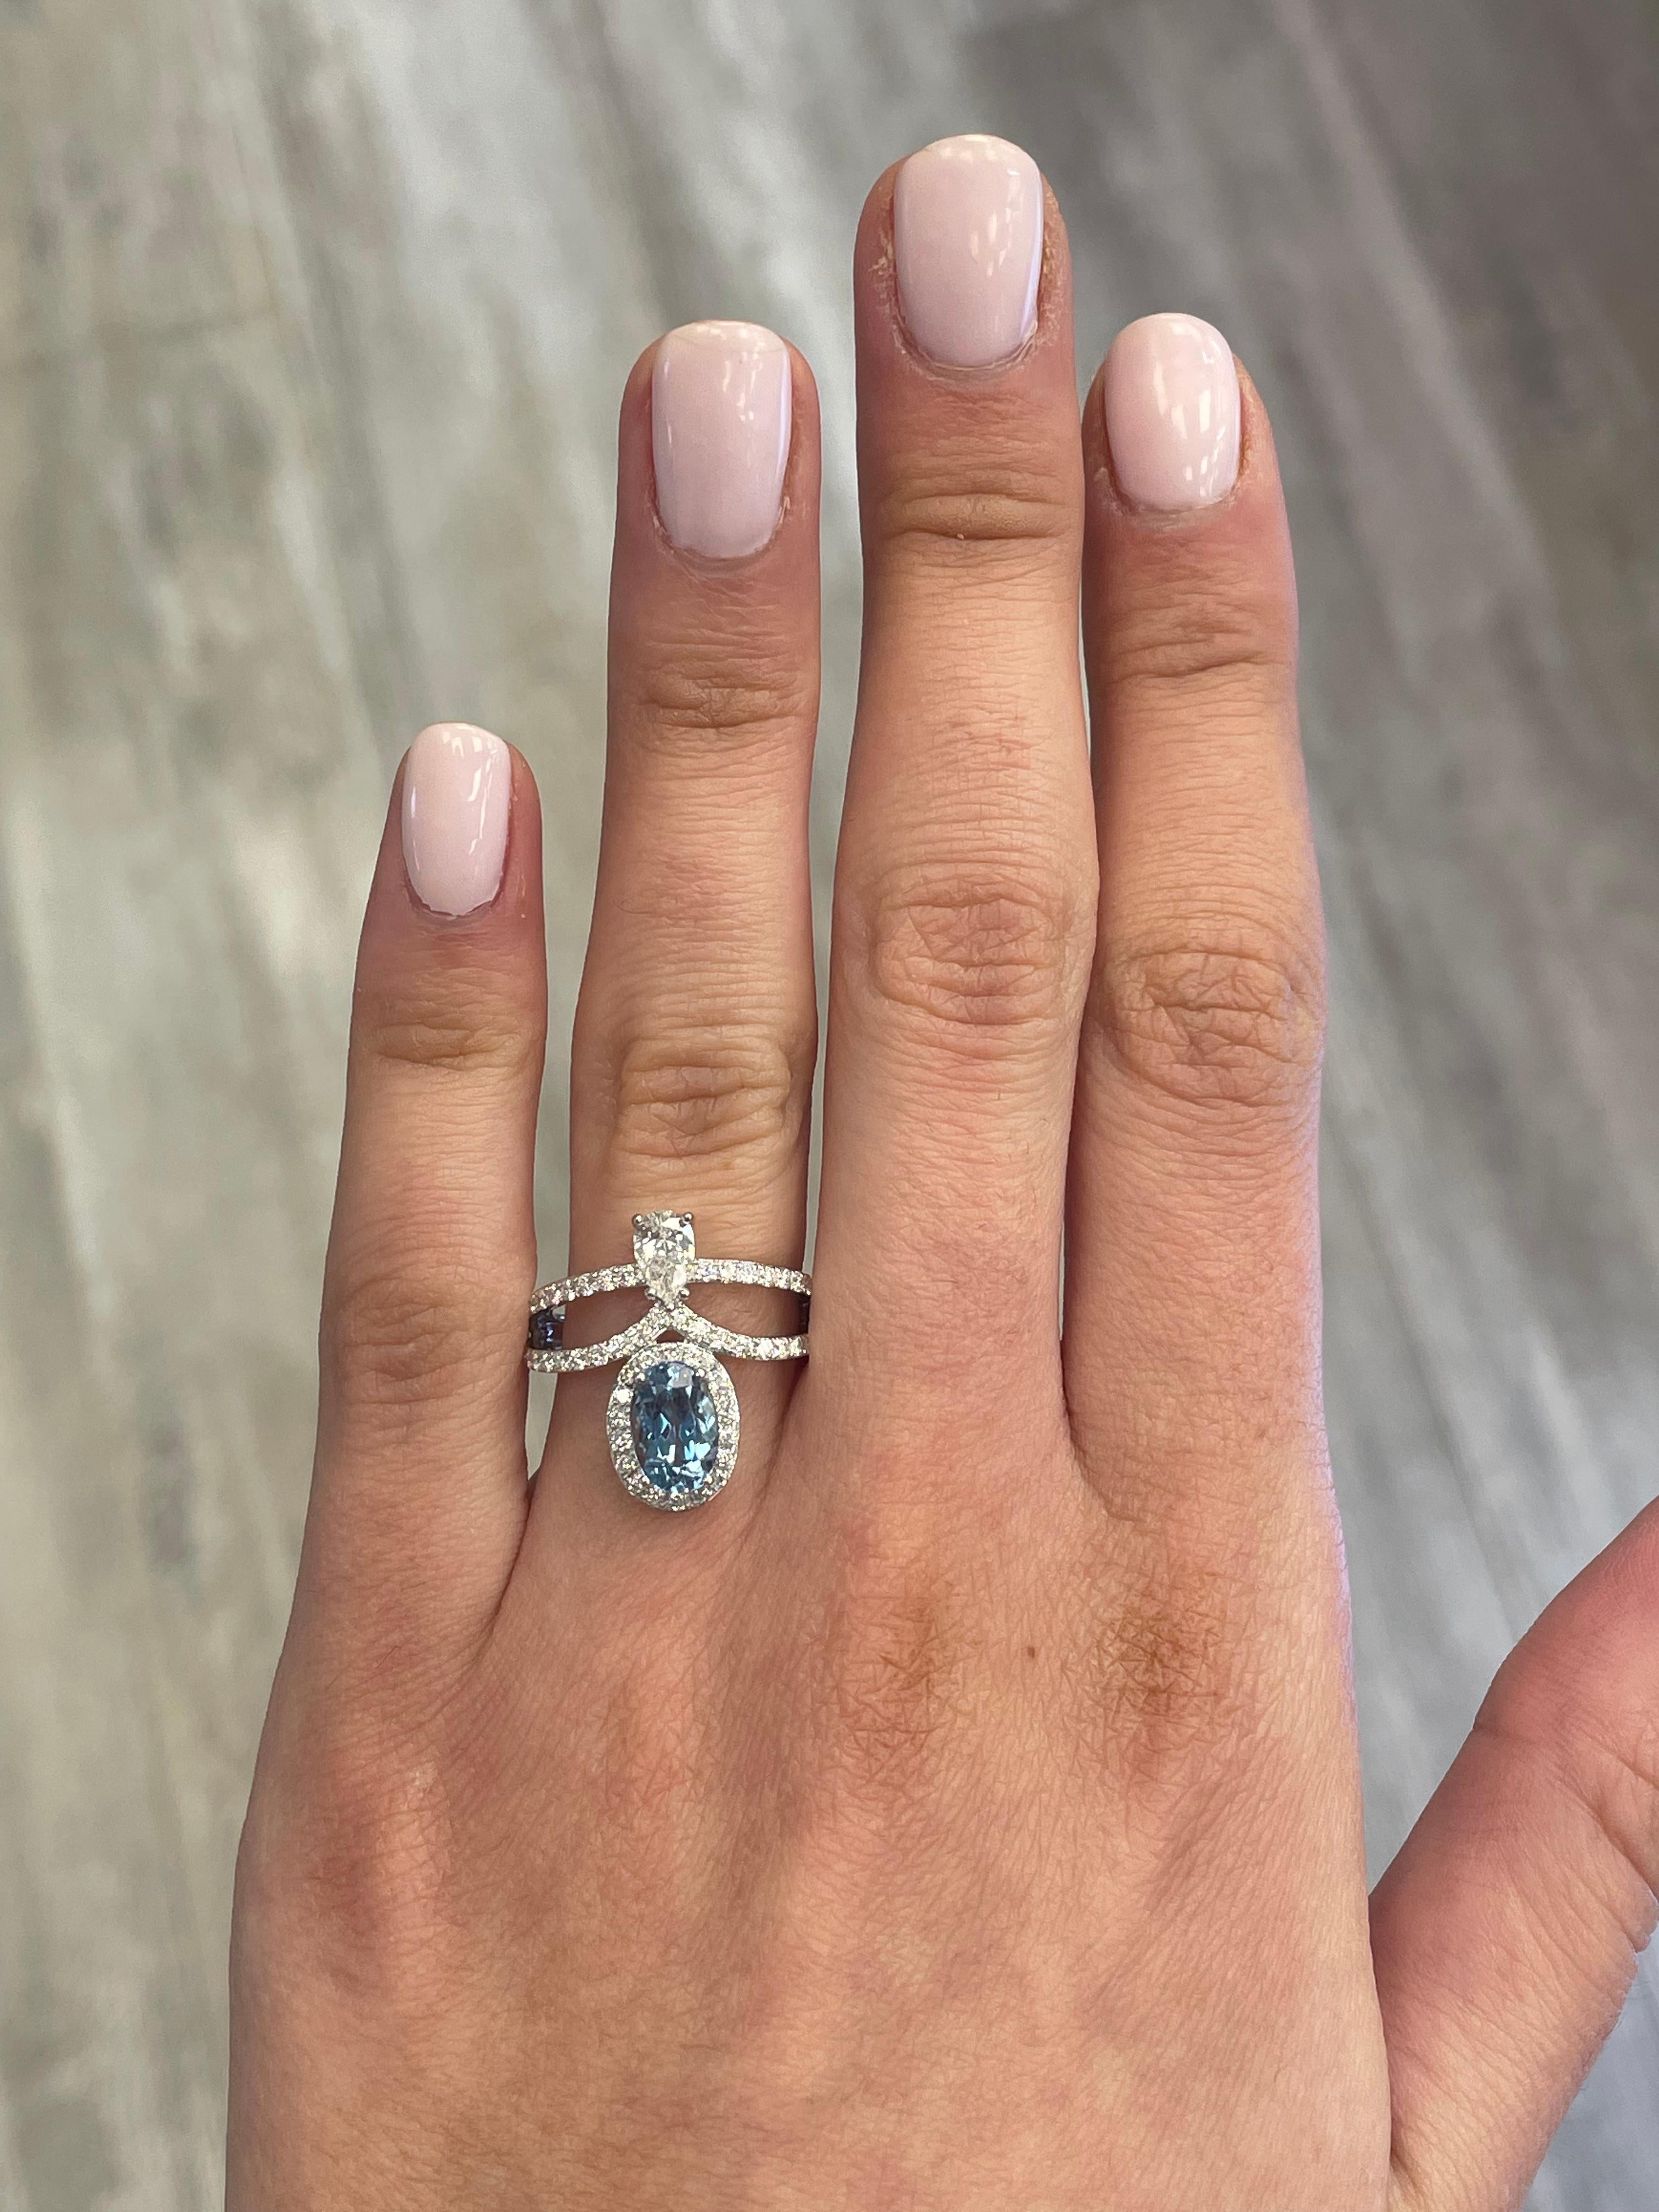 Stunning aquamarine and diamond ring, by Alexander Beverly Hills.
1 oval aquamarine, 1.08 carats. 1 pear shape diamonds, 0.34 carats, approximately G/H color and VS clarity. Complimented by 58 round brilliant diamonds, 0.60 carats. Approximately D-F